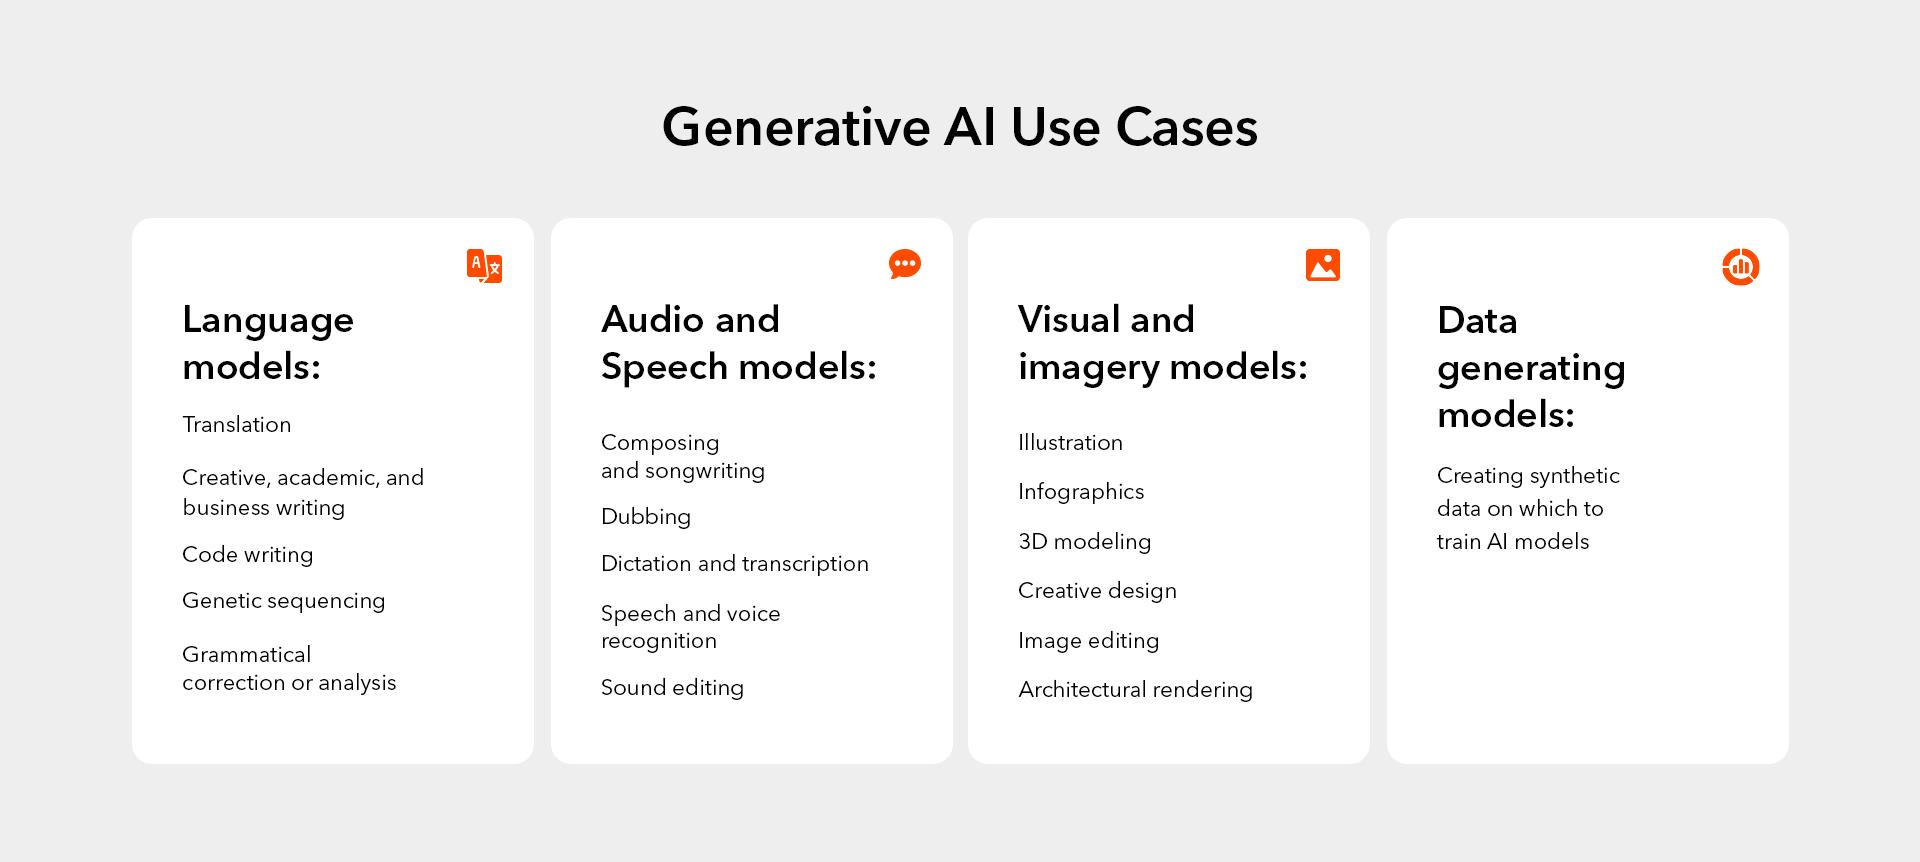 Generative AI use cases: Language models, audio and speech models, visual and imagery models and data generating models.